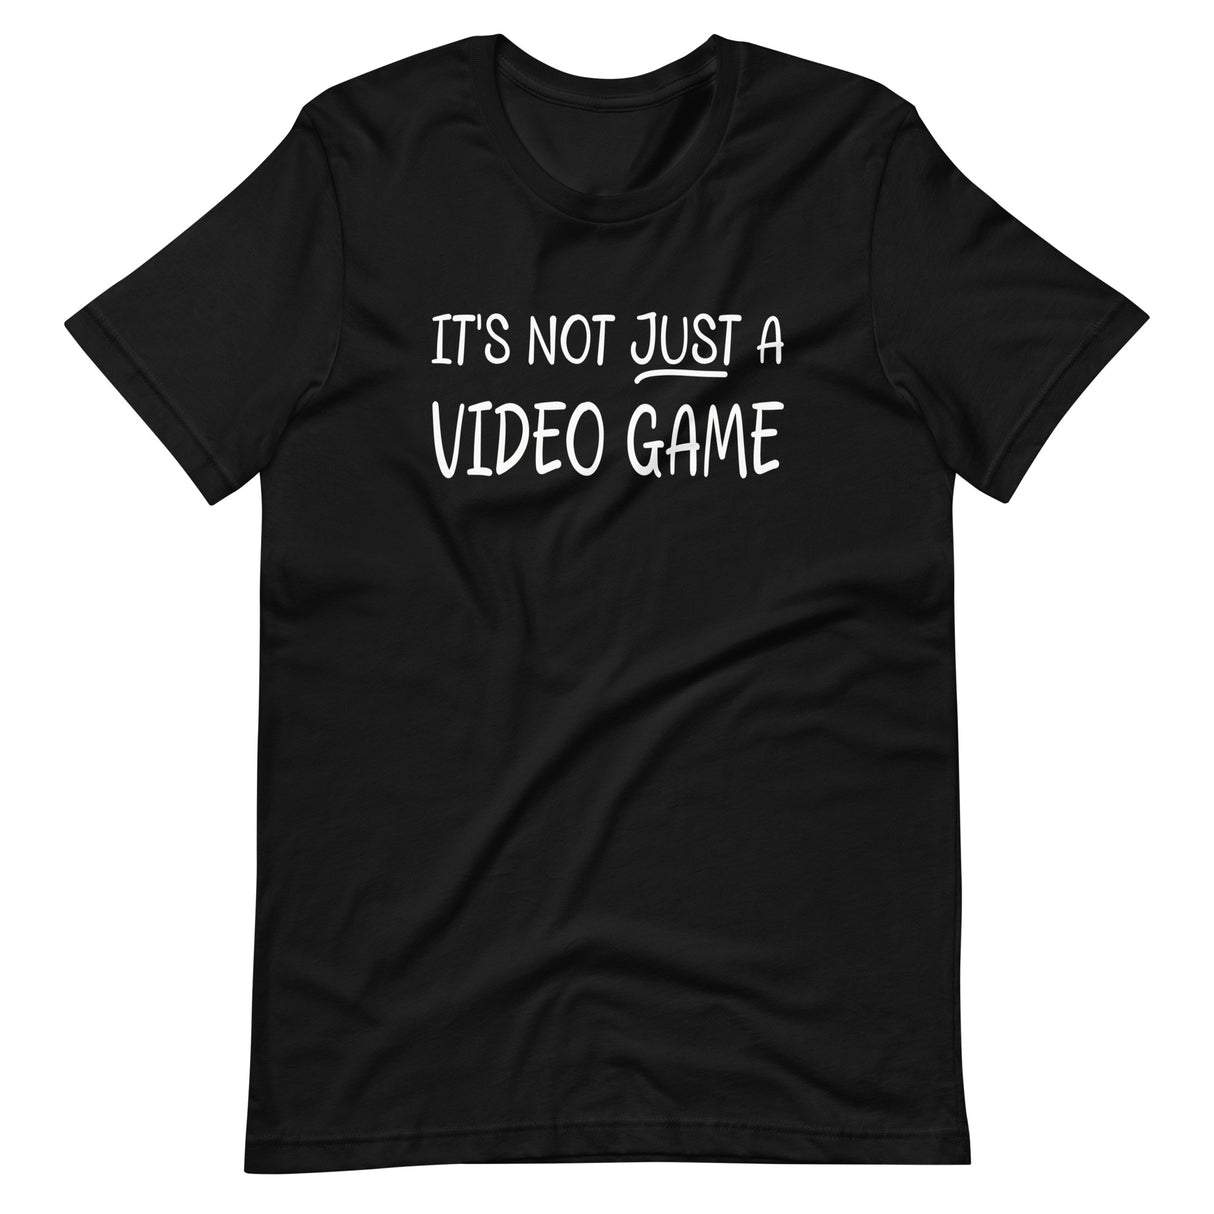 It's Not Just a Video Game Shirt